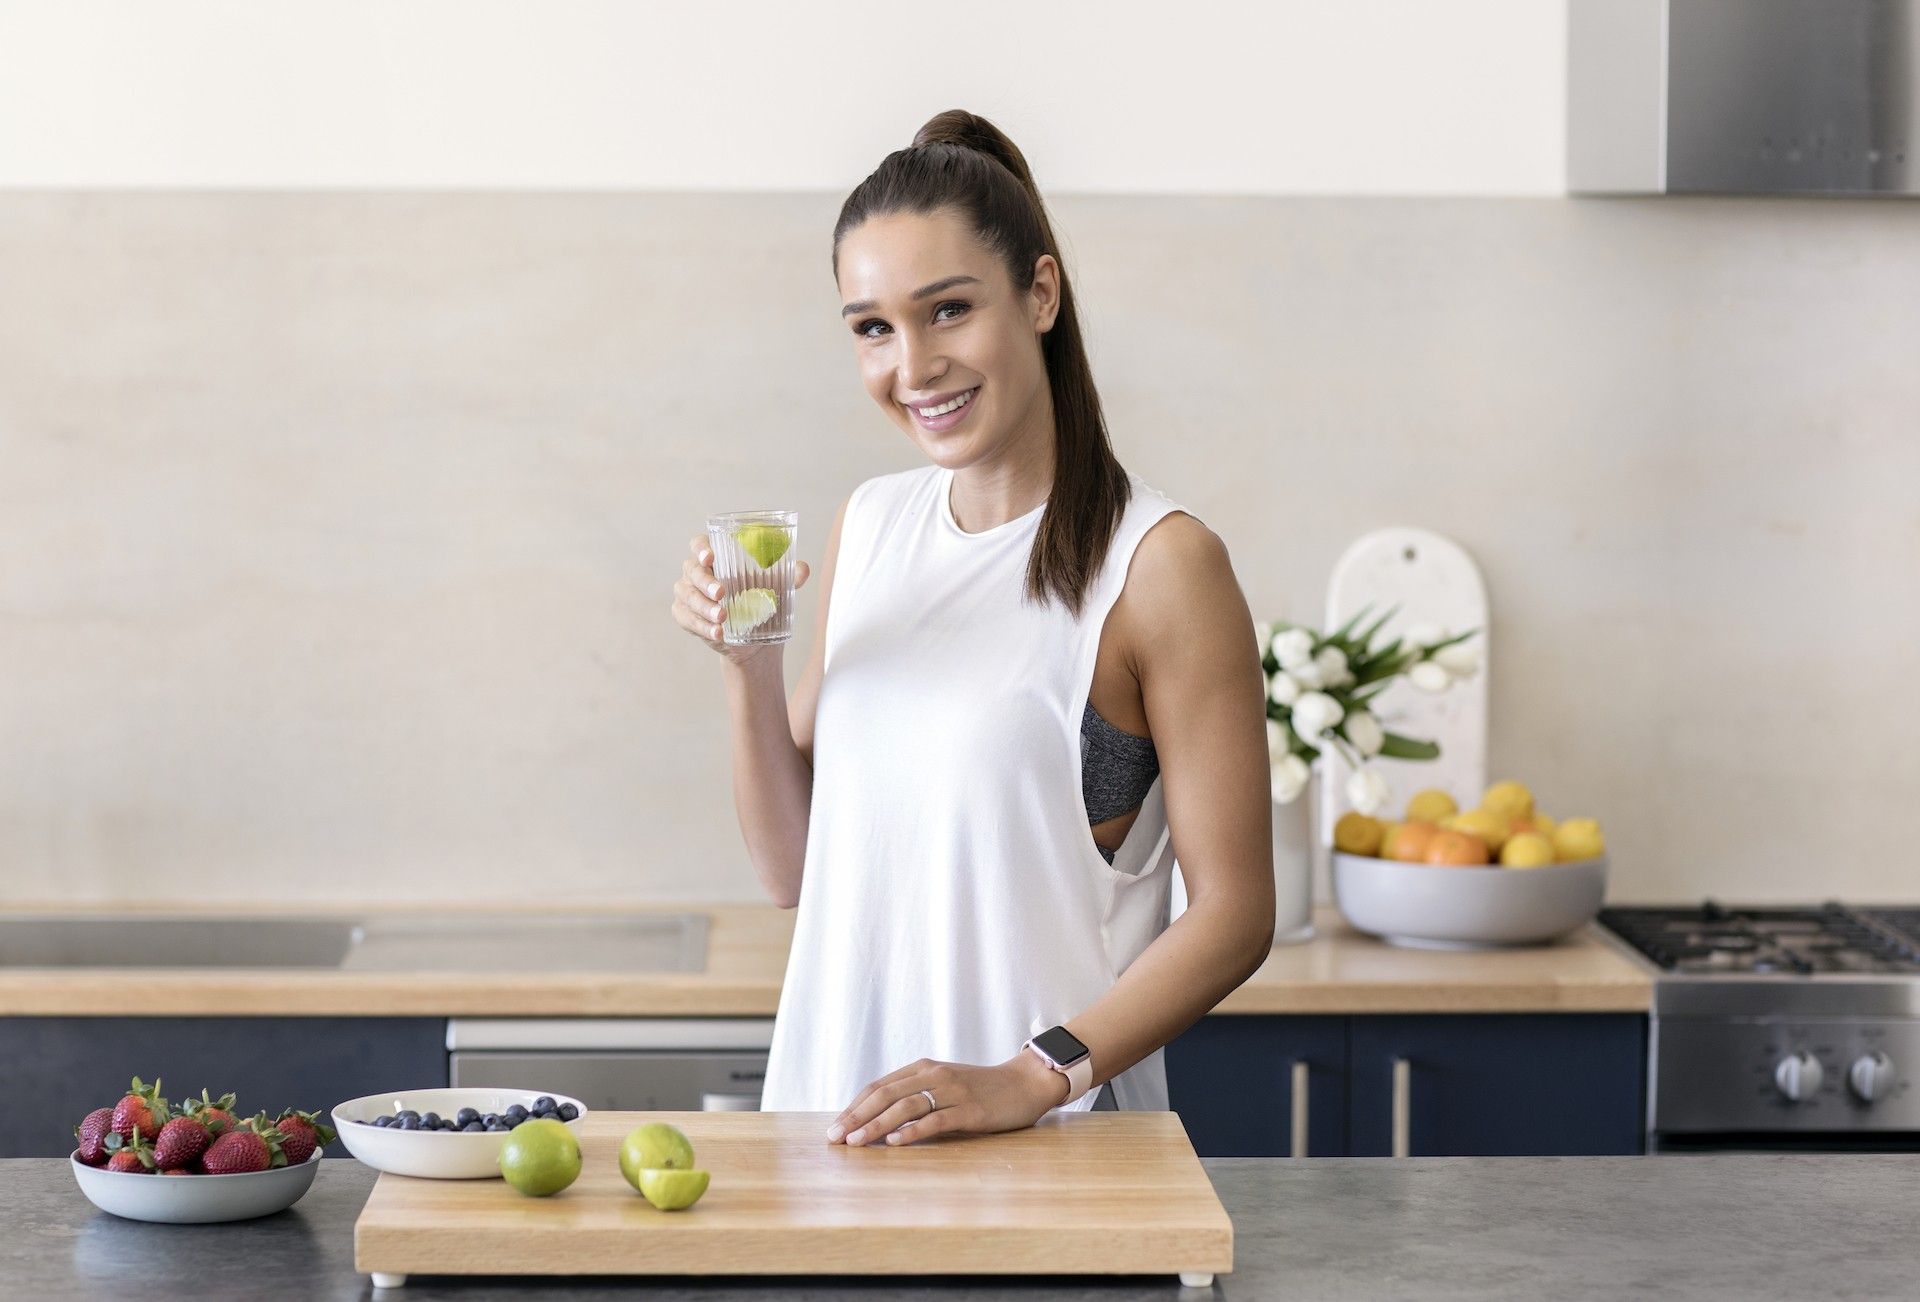 Meet Kayla Itsines – the Badass Who Turned an Instagram Feed into a Fitness Empire 1